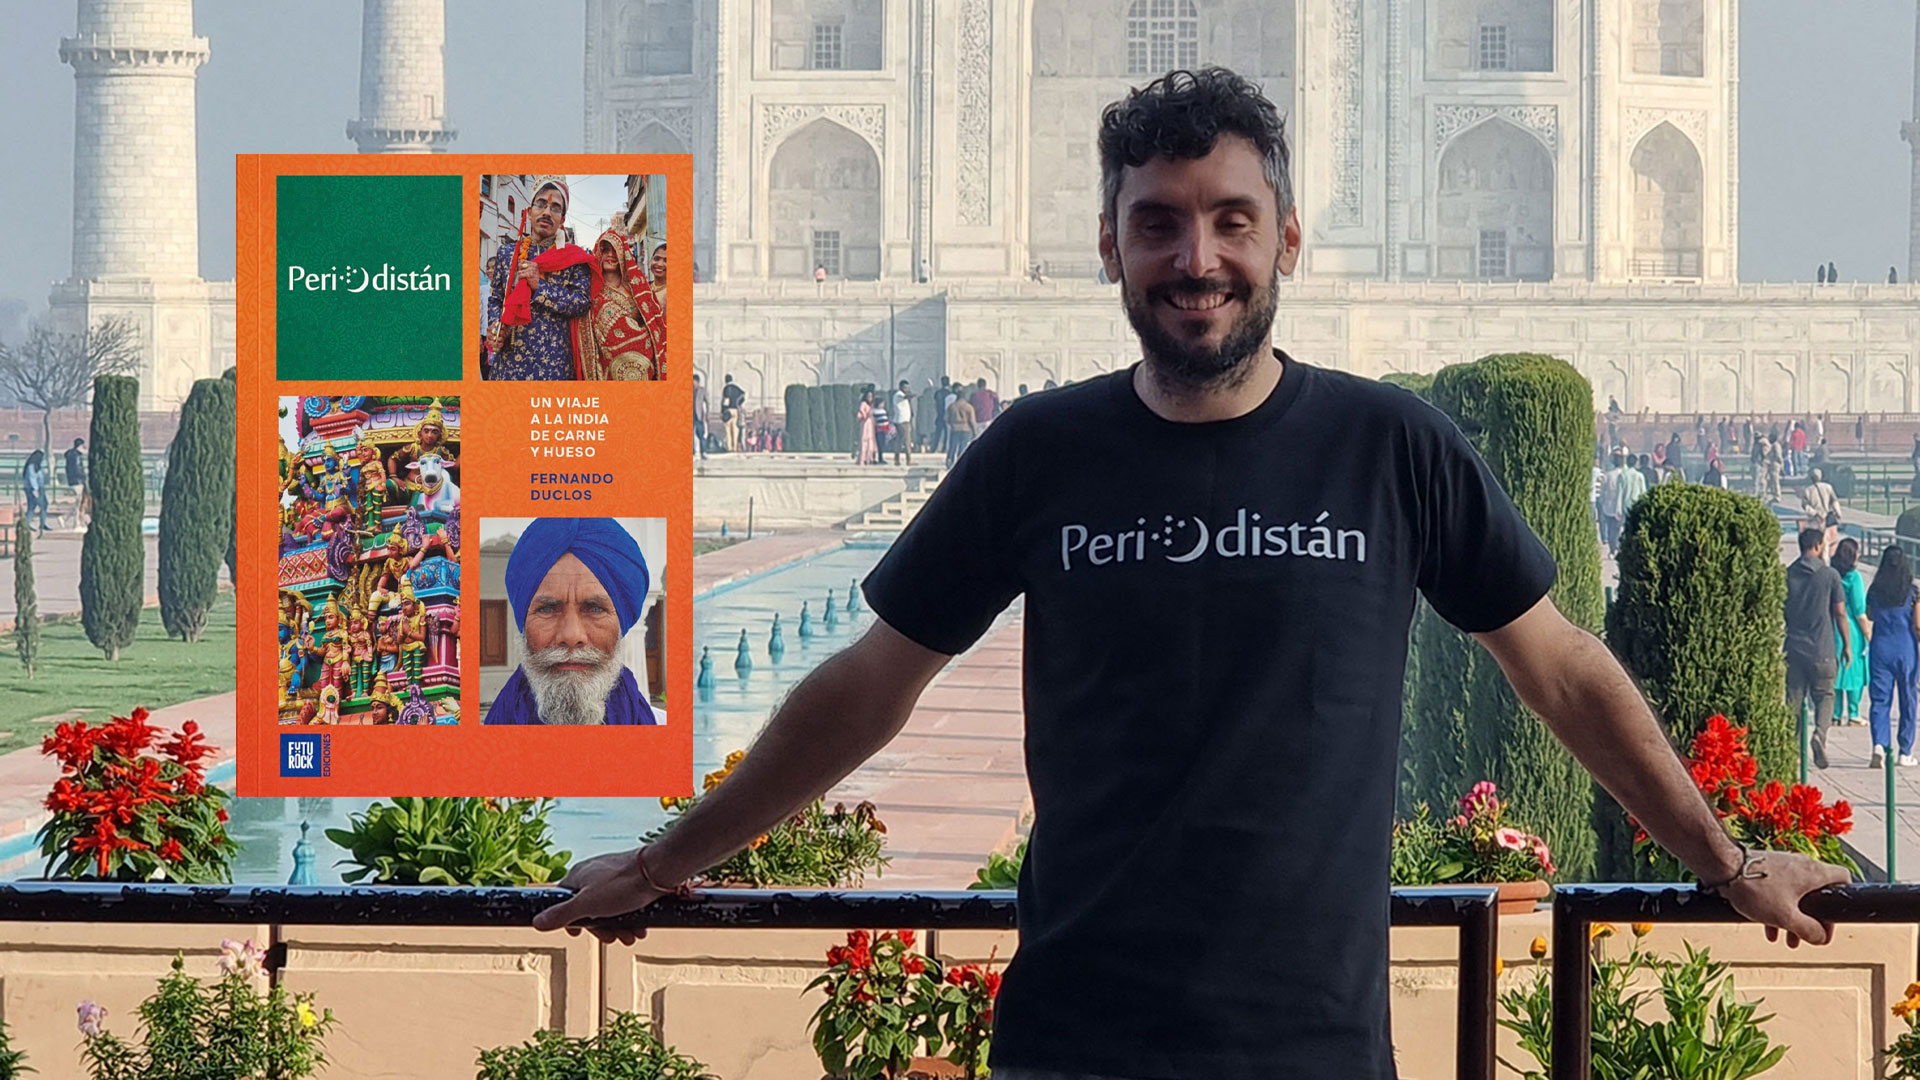 The Argentine traveler Fernando Duclós, known in networks as Periodistán, published his new book, "A trip to India of flesh and blood"in which he recounts the five months he spent in that "subcontinent" in which 1.4 billion people live in a territory not much larger than Argentina. 